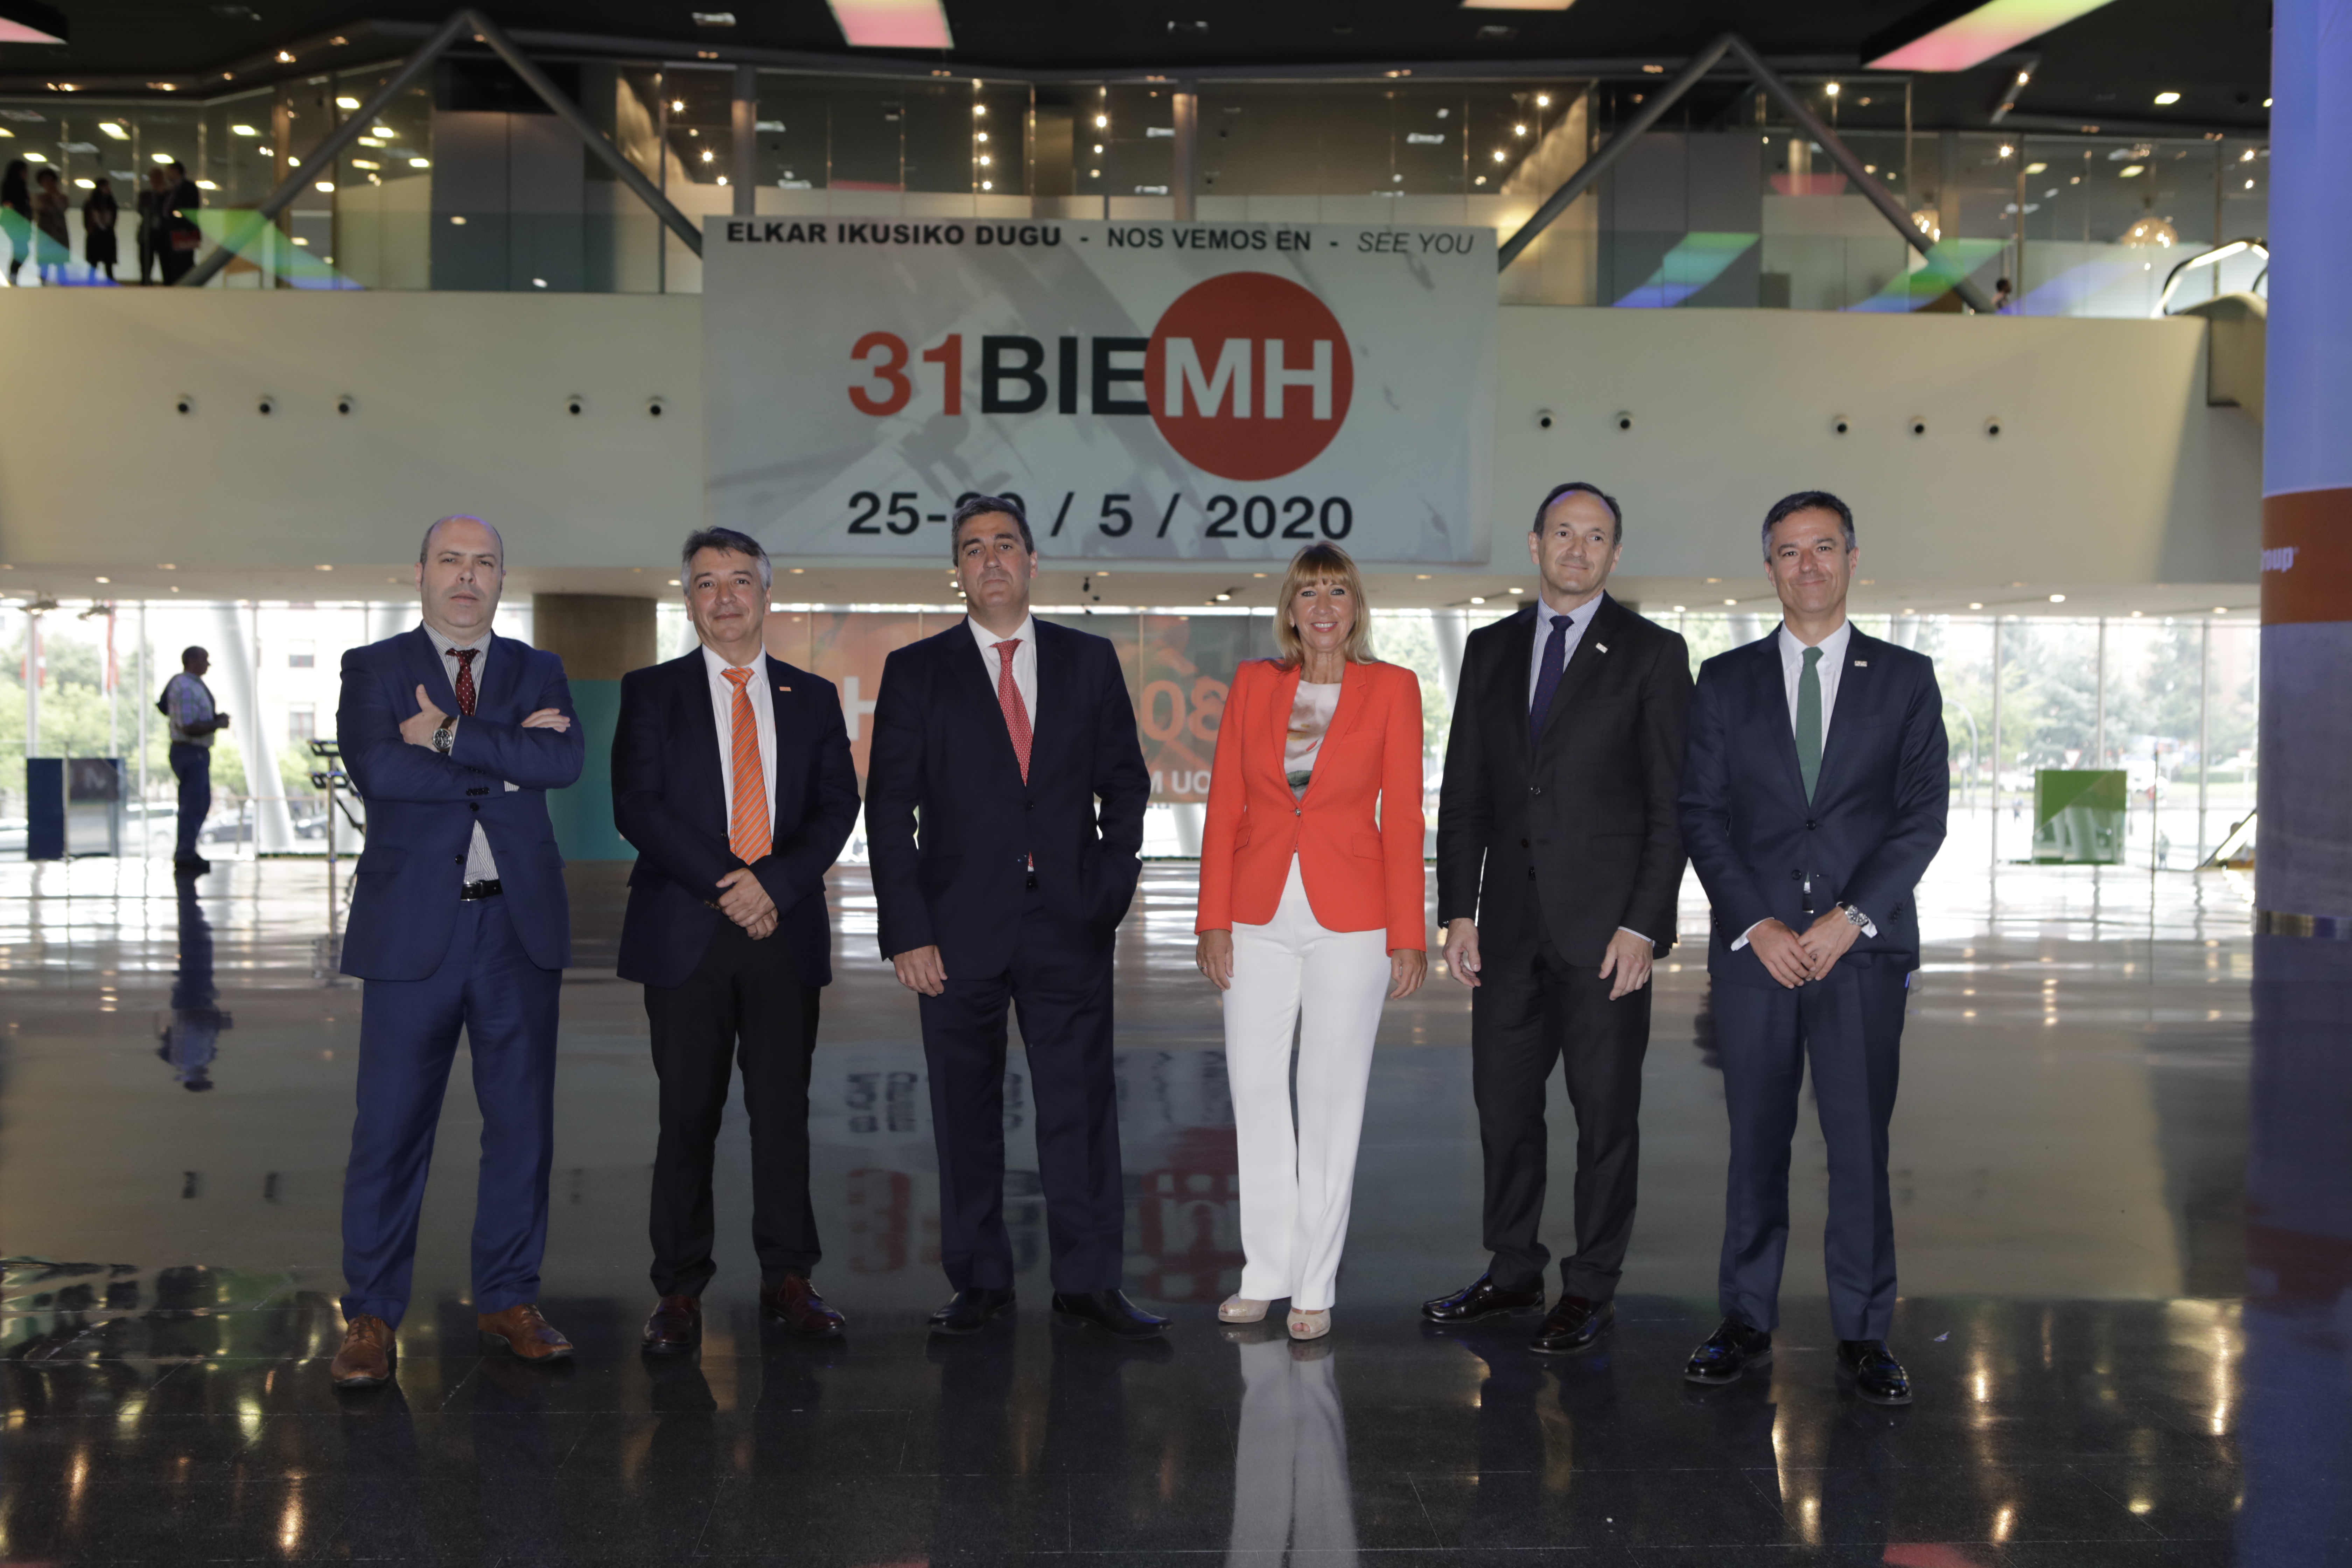 THE BIEMH TURNS BILBAO ONCE AGAIN INTO THE CAPITAL OF INDUSTRY